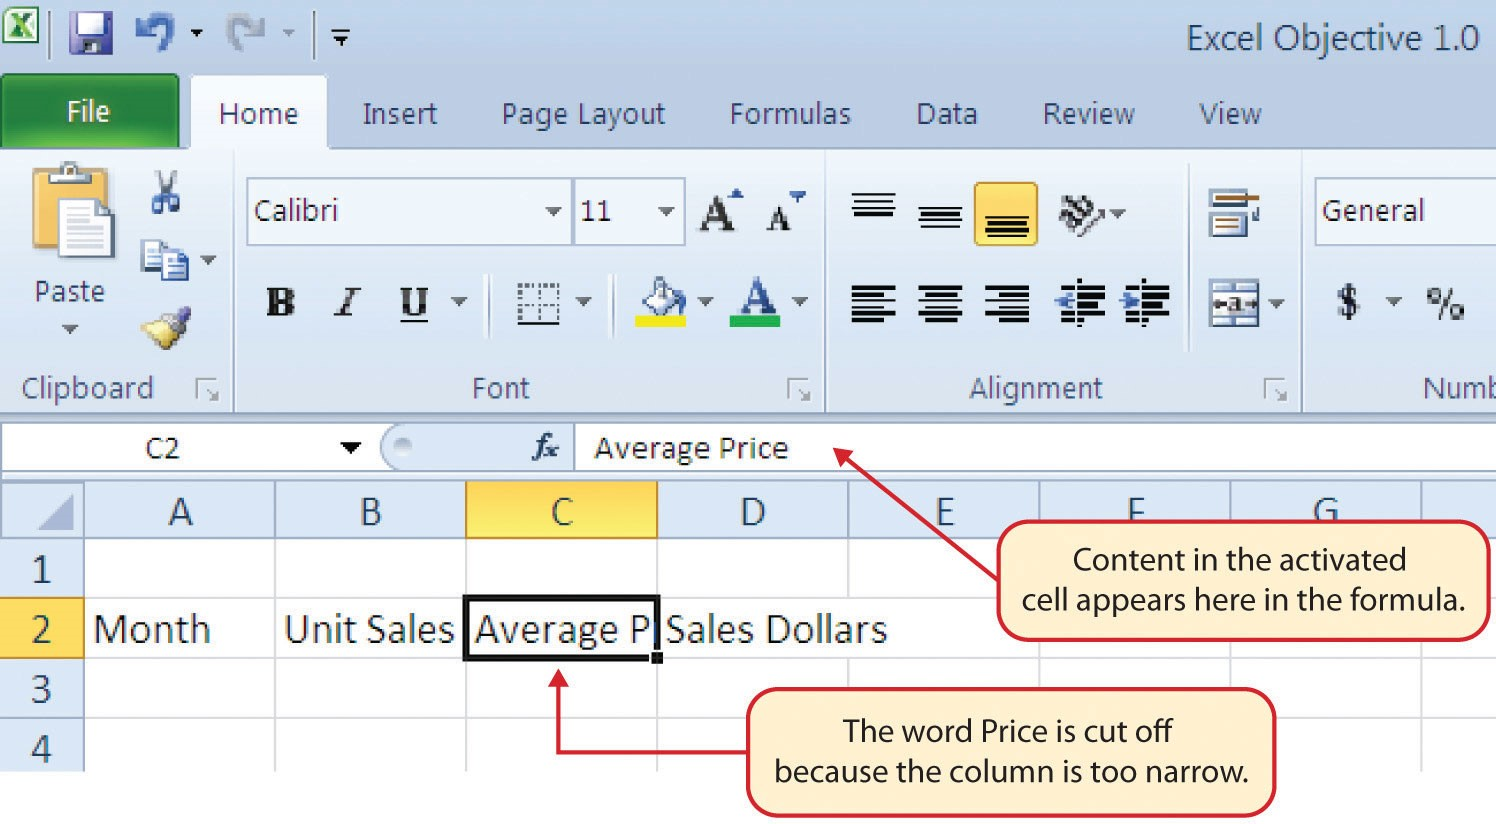 Cell C2 activated with "Average Price" in formula displayed as "Average P" in cell due to narrow column.